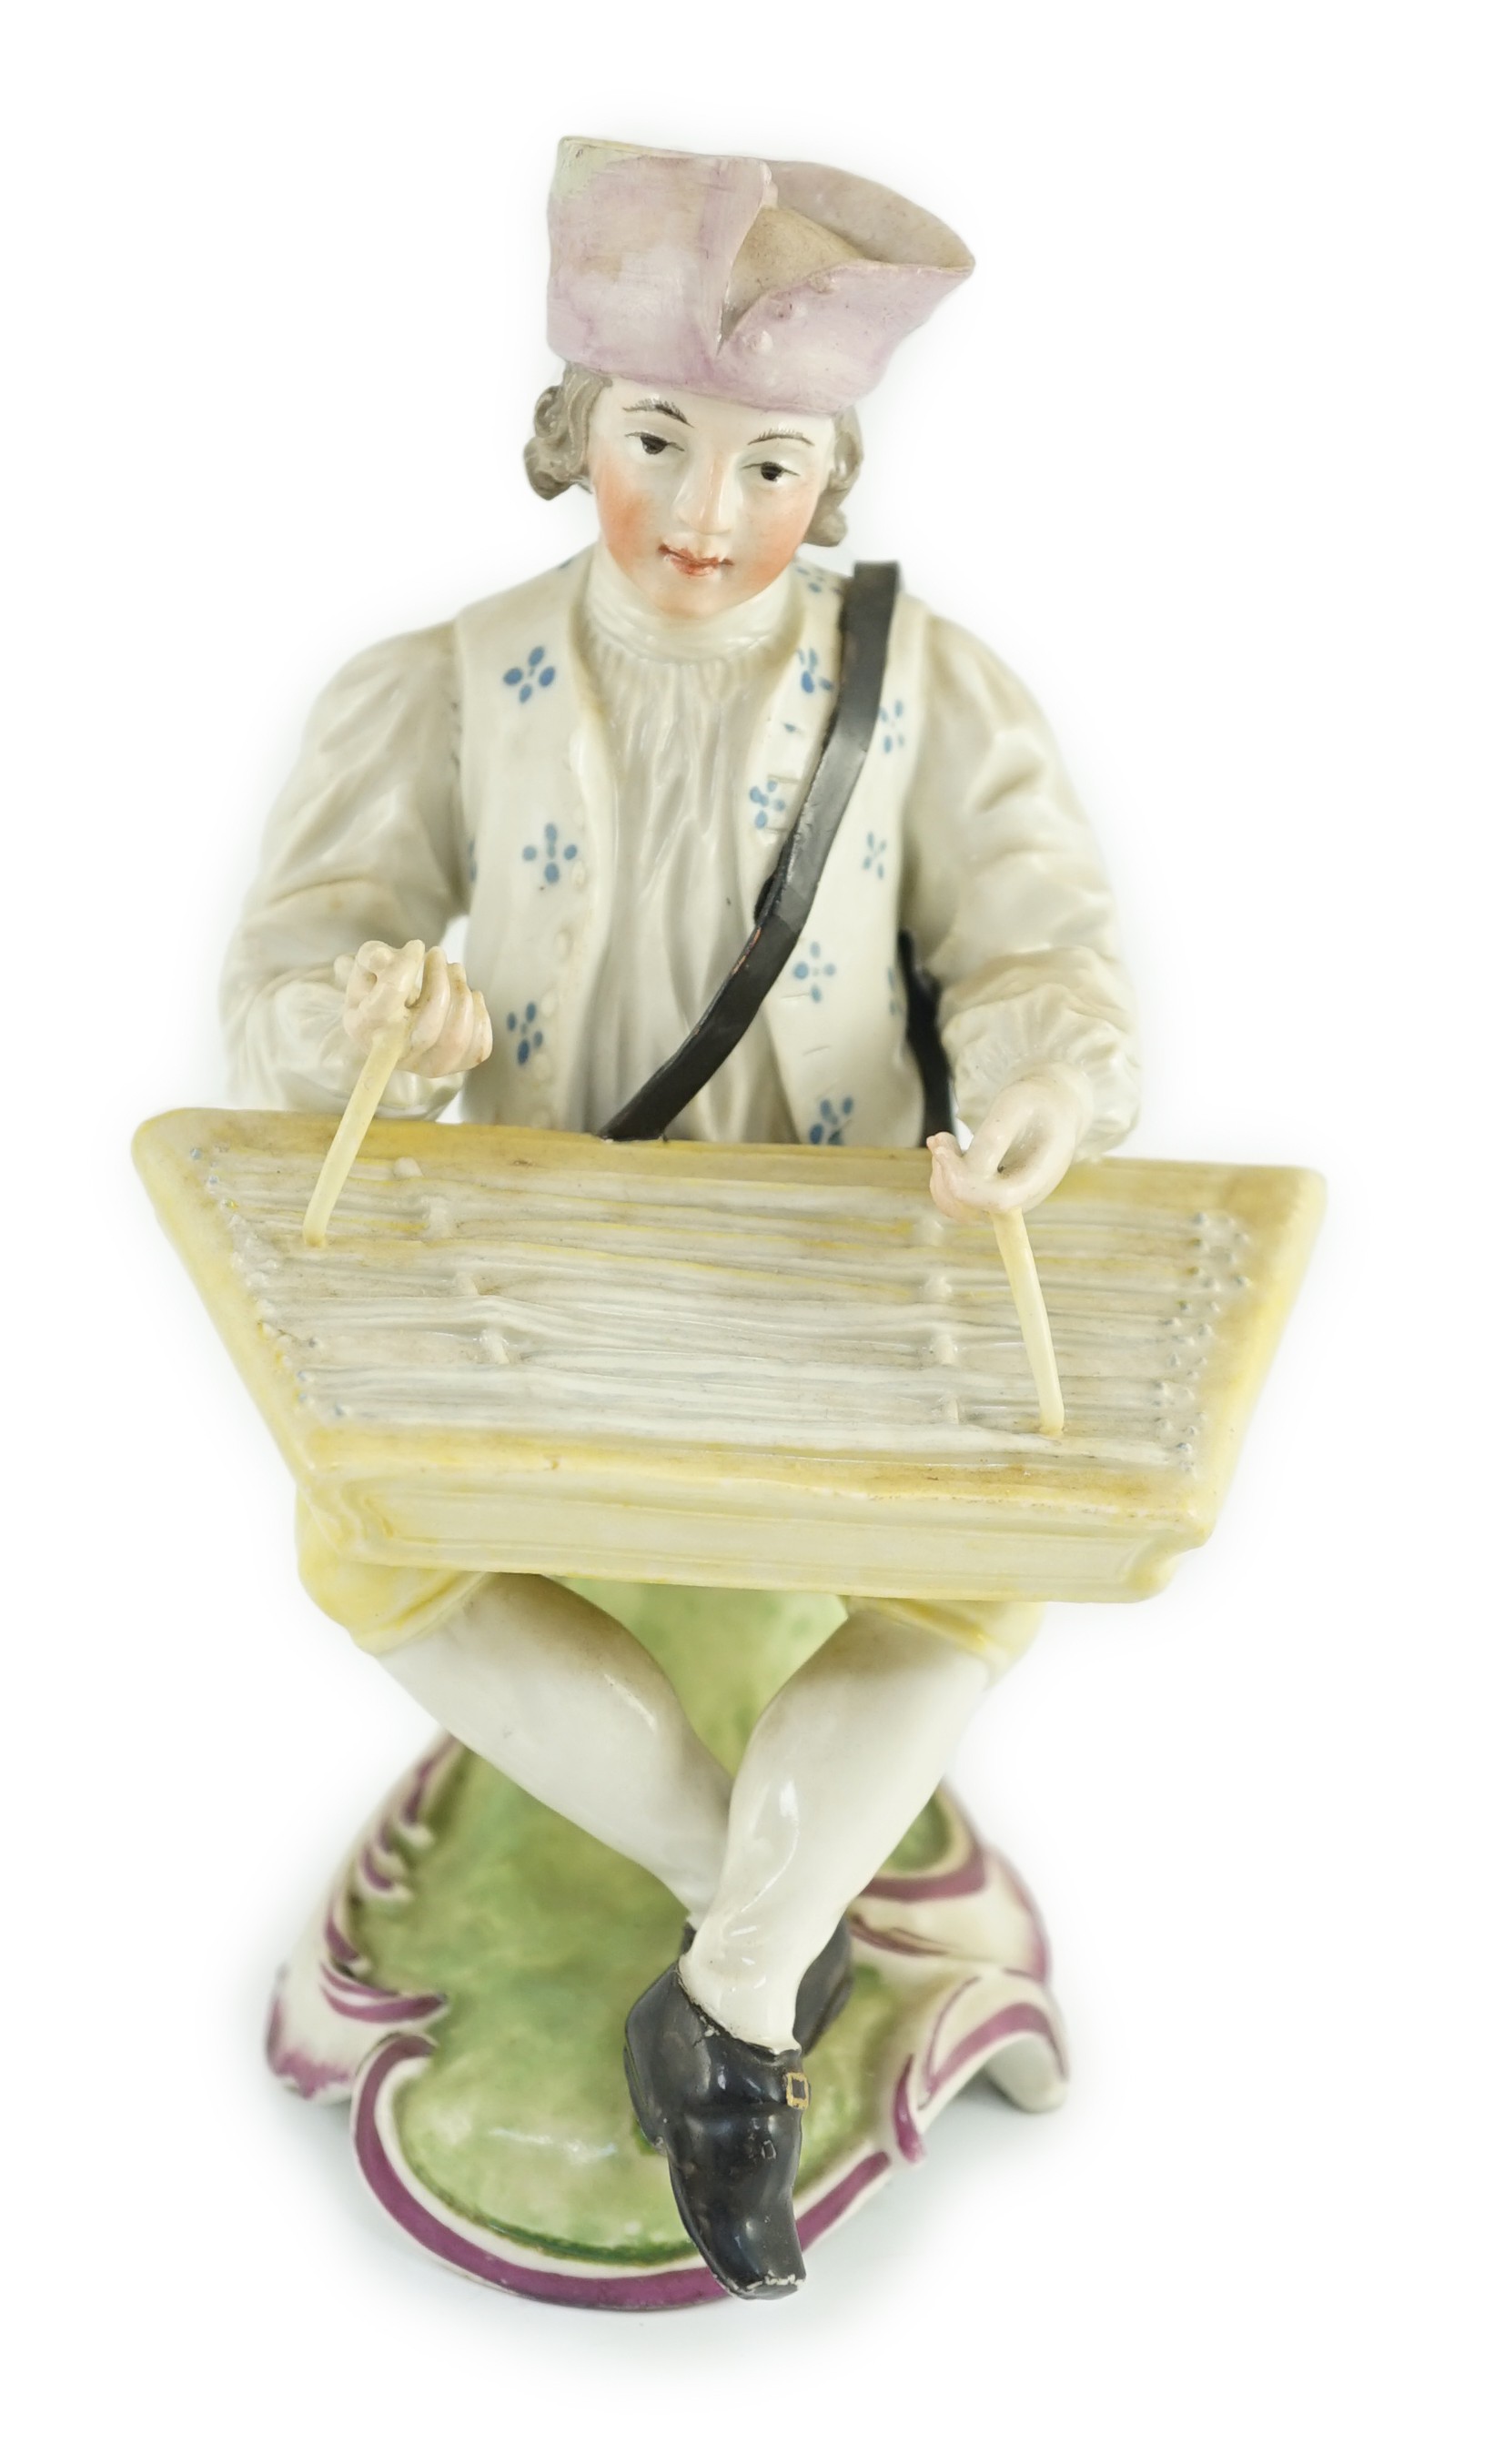 A Frankenthal porcelain figure of a zither player, c.1760, 15cm high, small areas of restoration, Provenance - purchased from Winifred Williams, Eastbourne/London before 1970.                                             